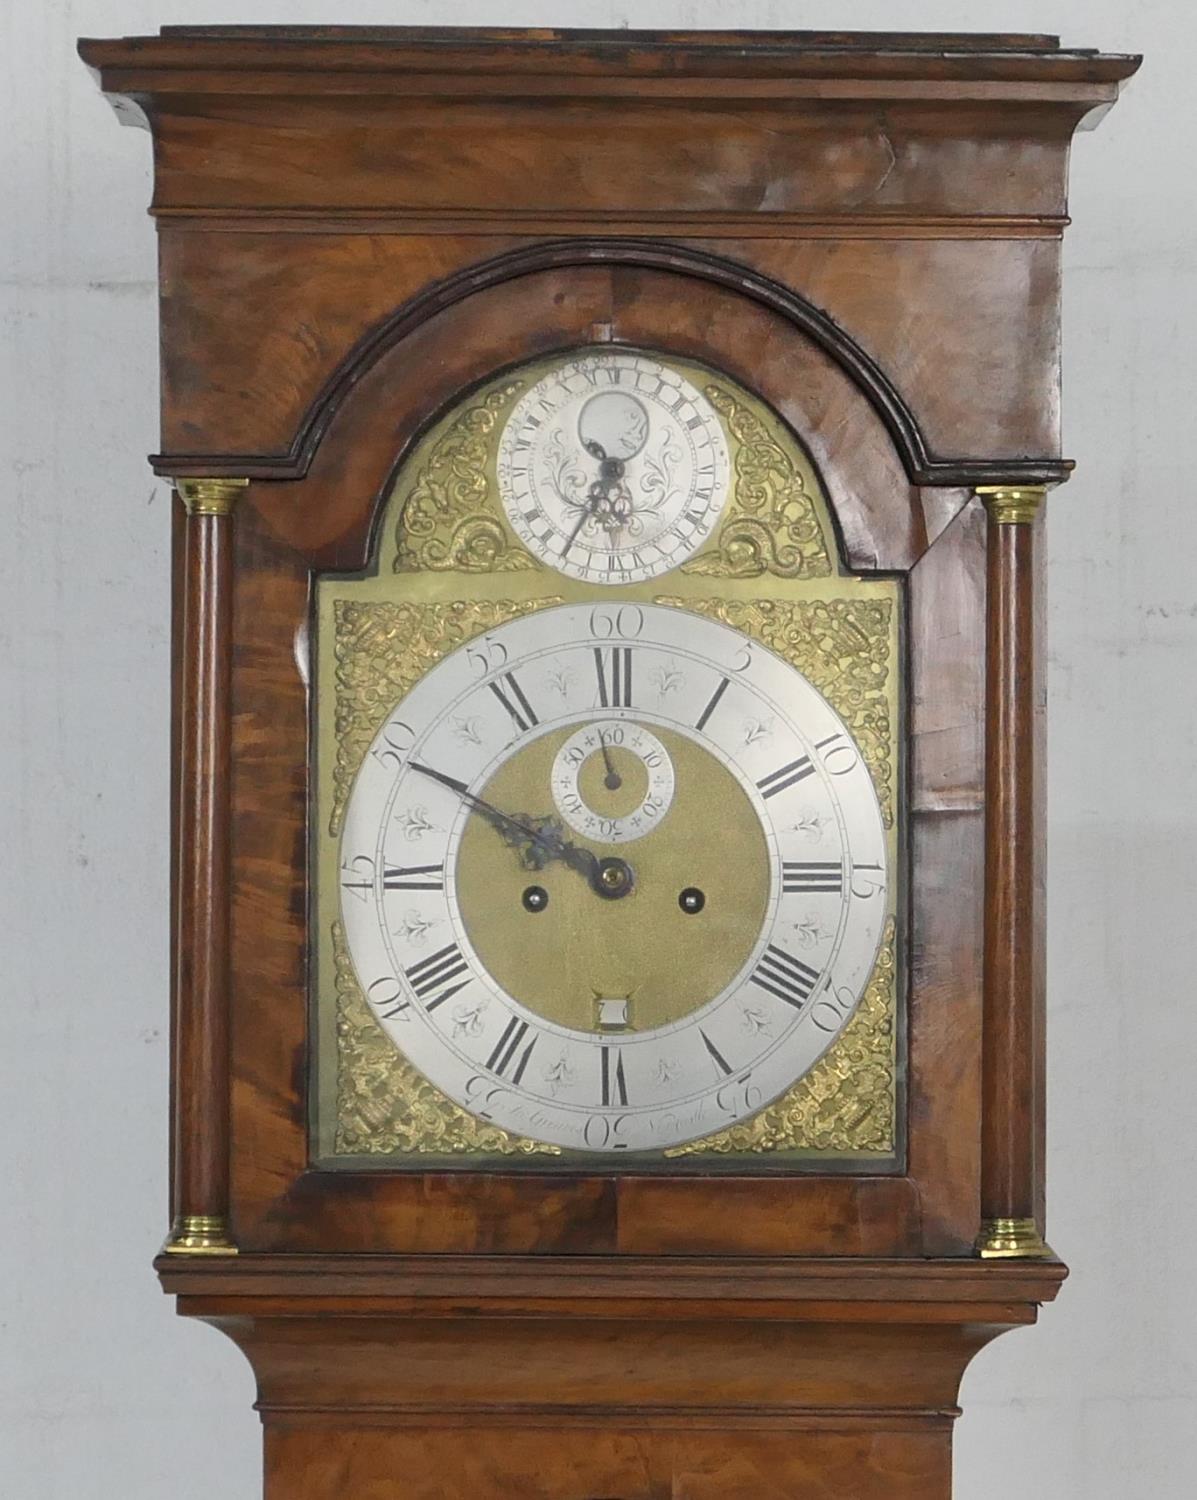 John Greaves, Newcastle, walnut eight day longcase clock, mid 18th Century, the hood with cavetto